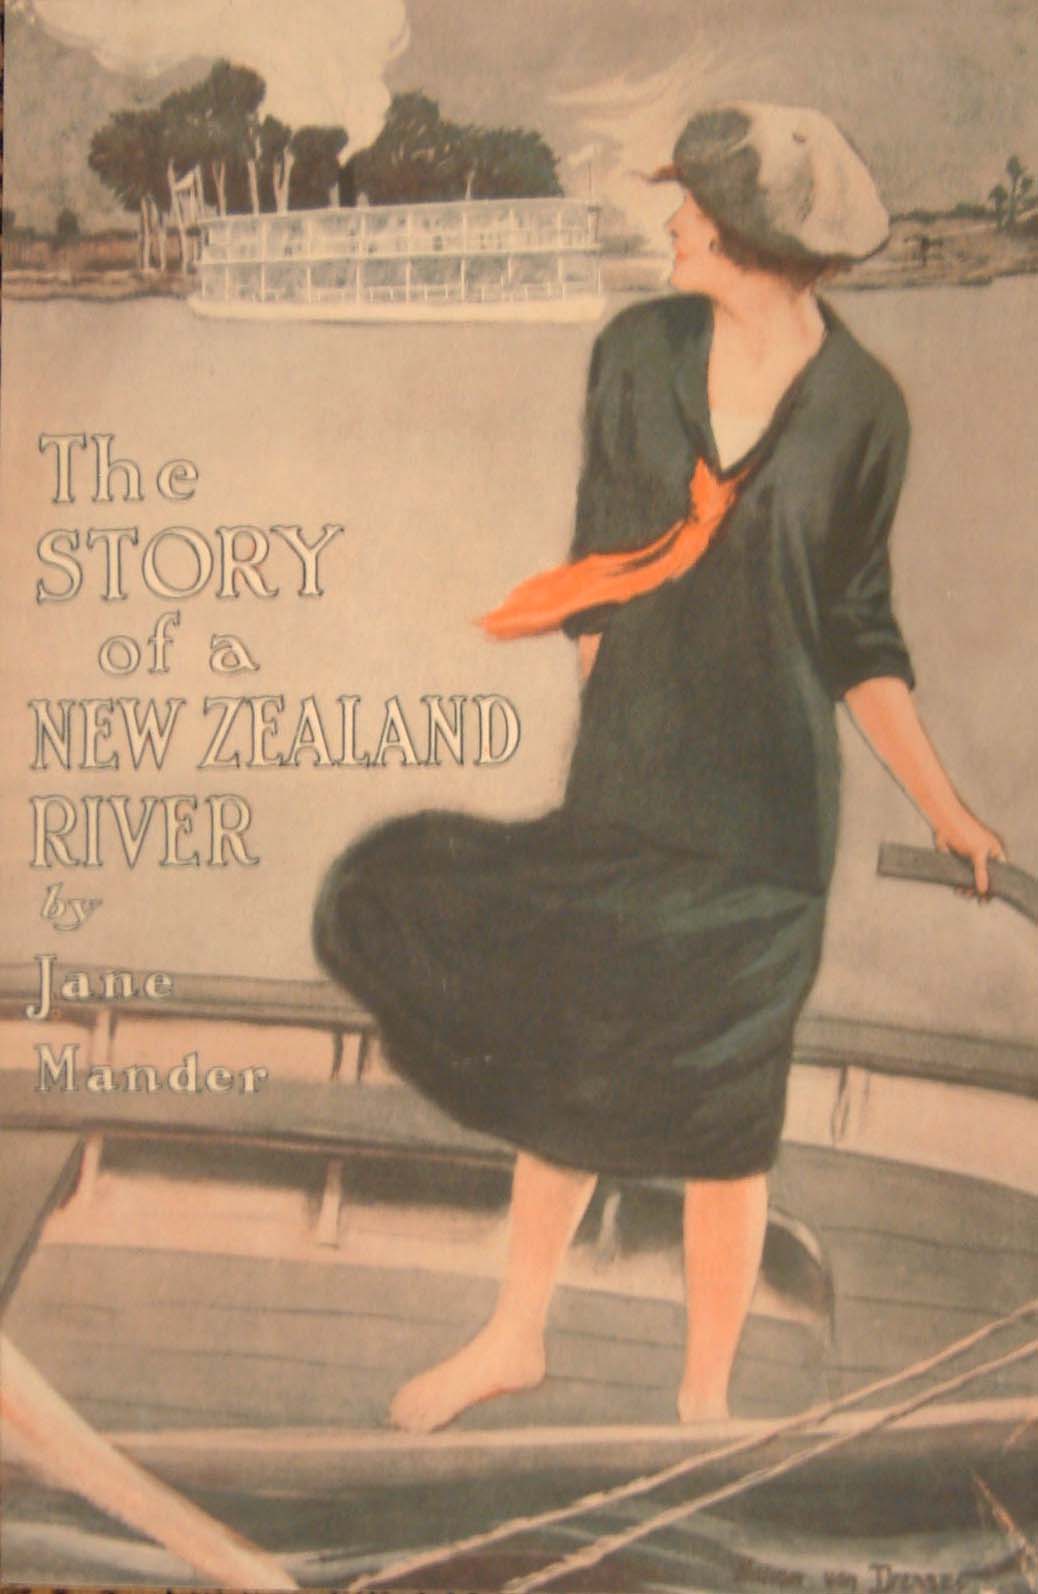 Jane Mander, The Story of a New Zealand River.